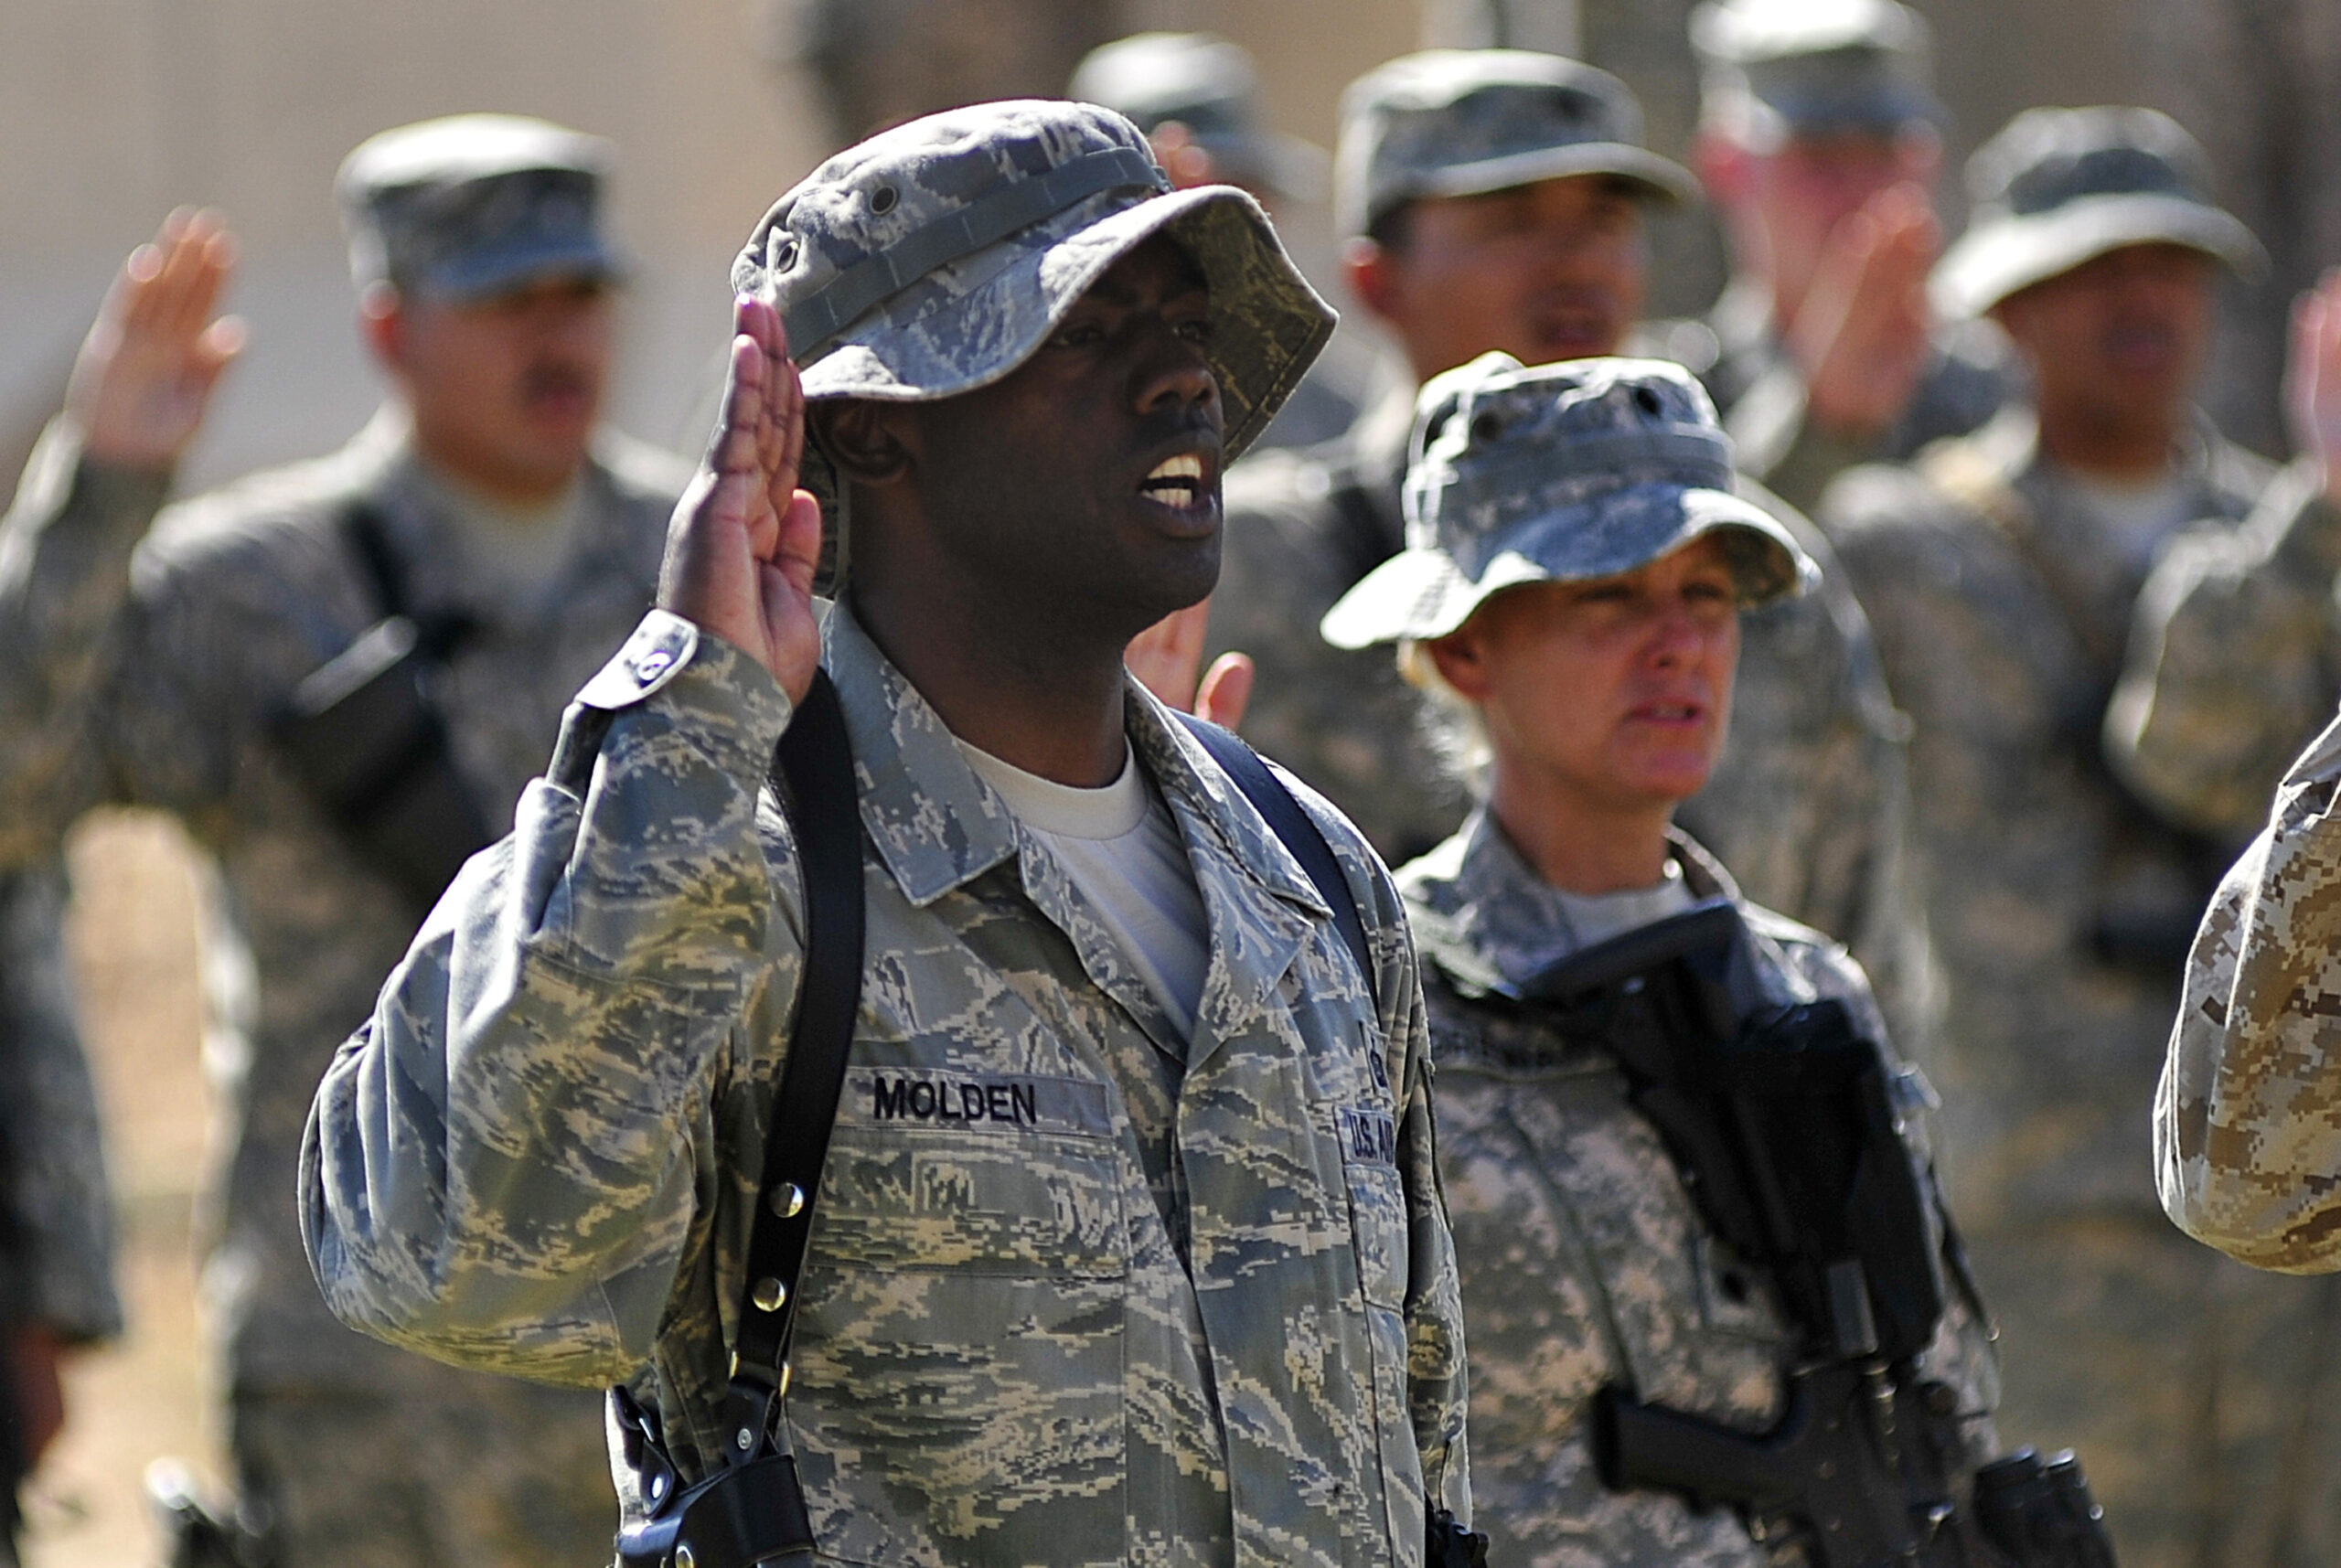 Tech. Sgt. LaMarcus Molden, 9th Air and Space Expeditionary Task Force-Iraq personnel manager, recites the oath of enlistment along with 125 other service members during a re-enlistment ceremony at Al Asad Air Base, Iraq, Oct. 5, 2011. Molden is deployed from Ramstein Air Base, Germany, and is from Albany, Ga.